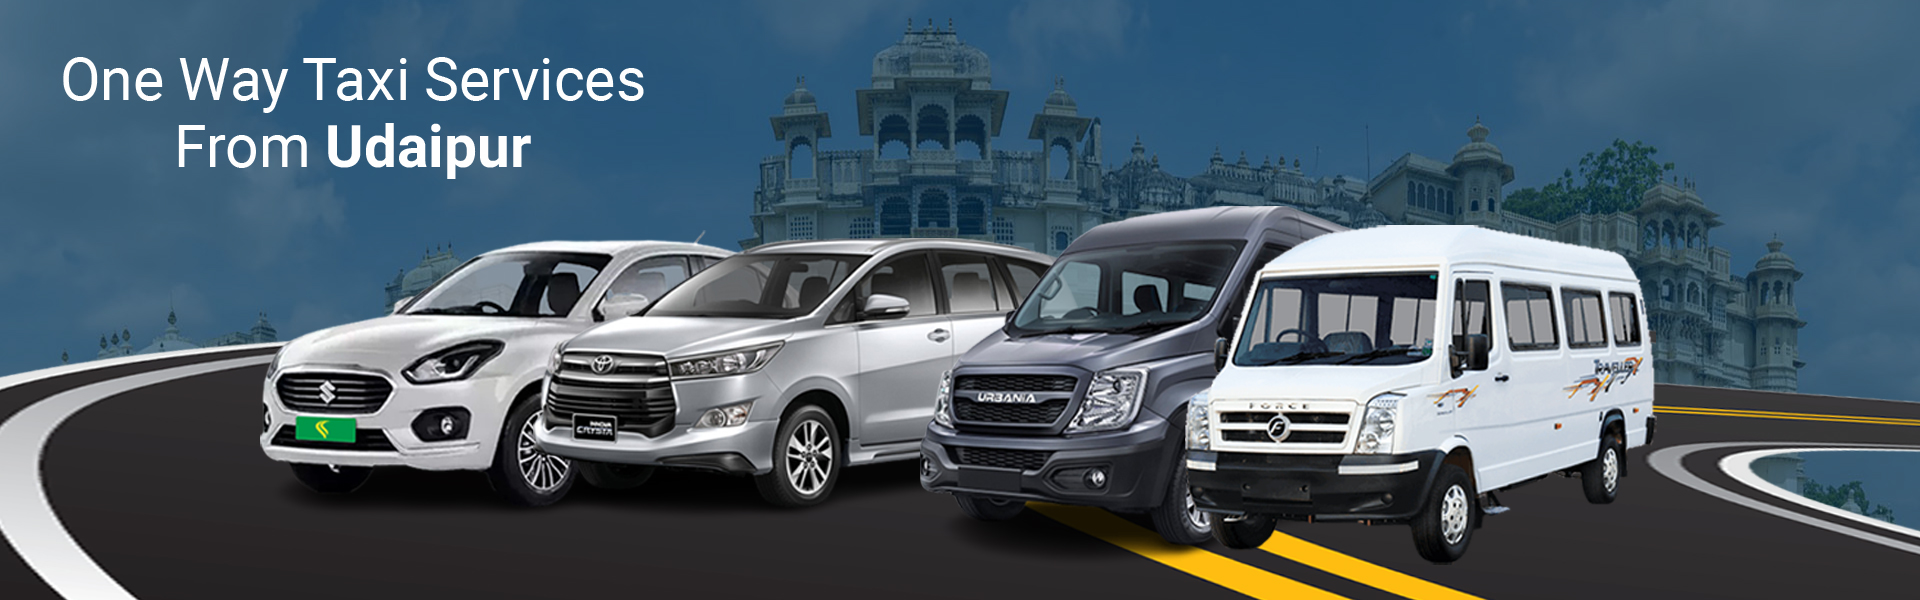 One Way Taxi Services From Udaipur